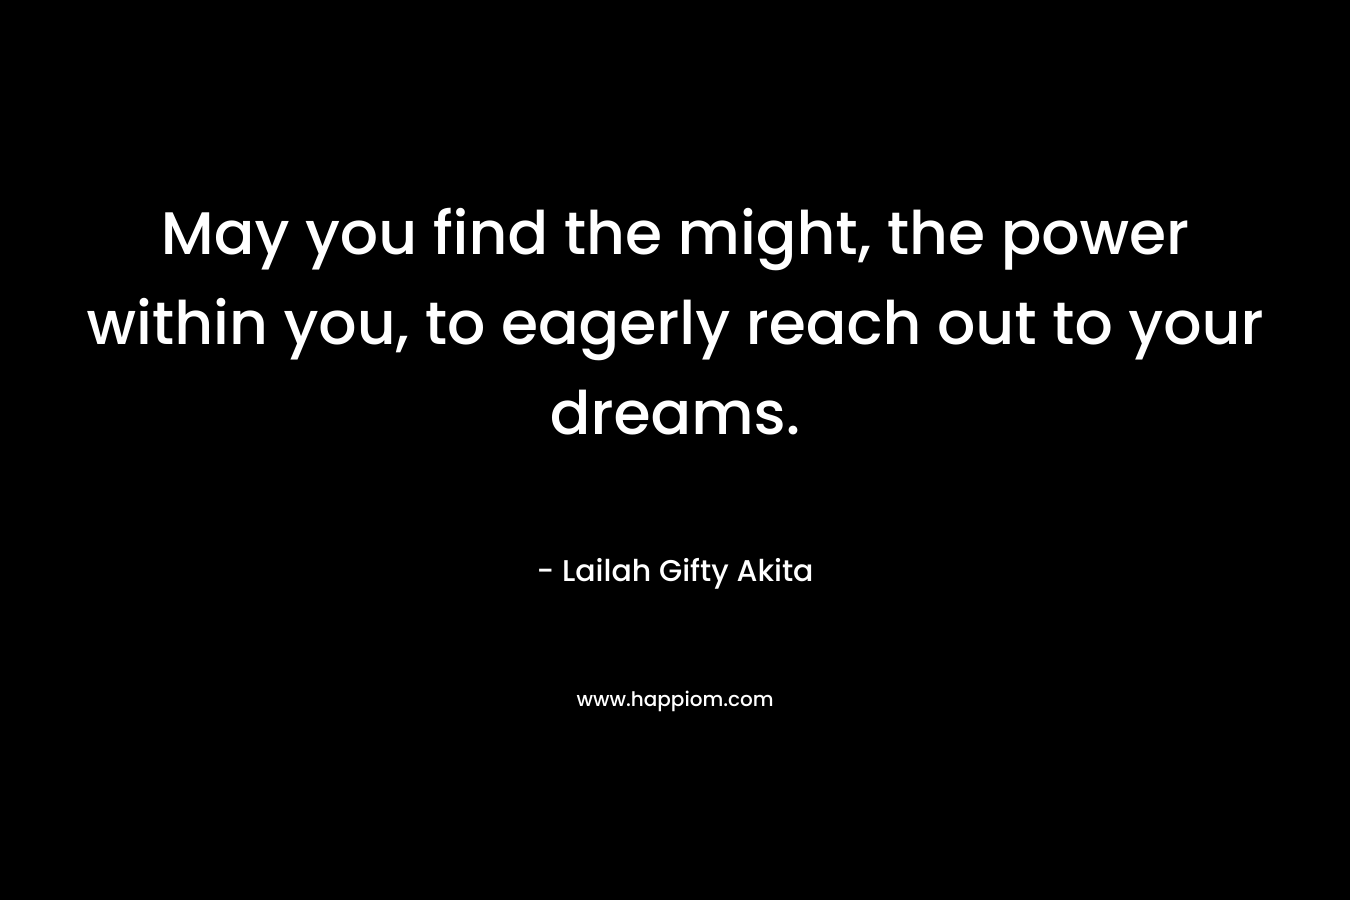 May you find the might, the power within you, to eagerly reach out to your dreams.